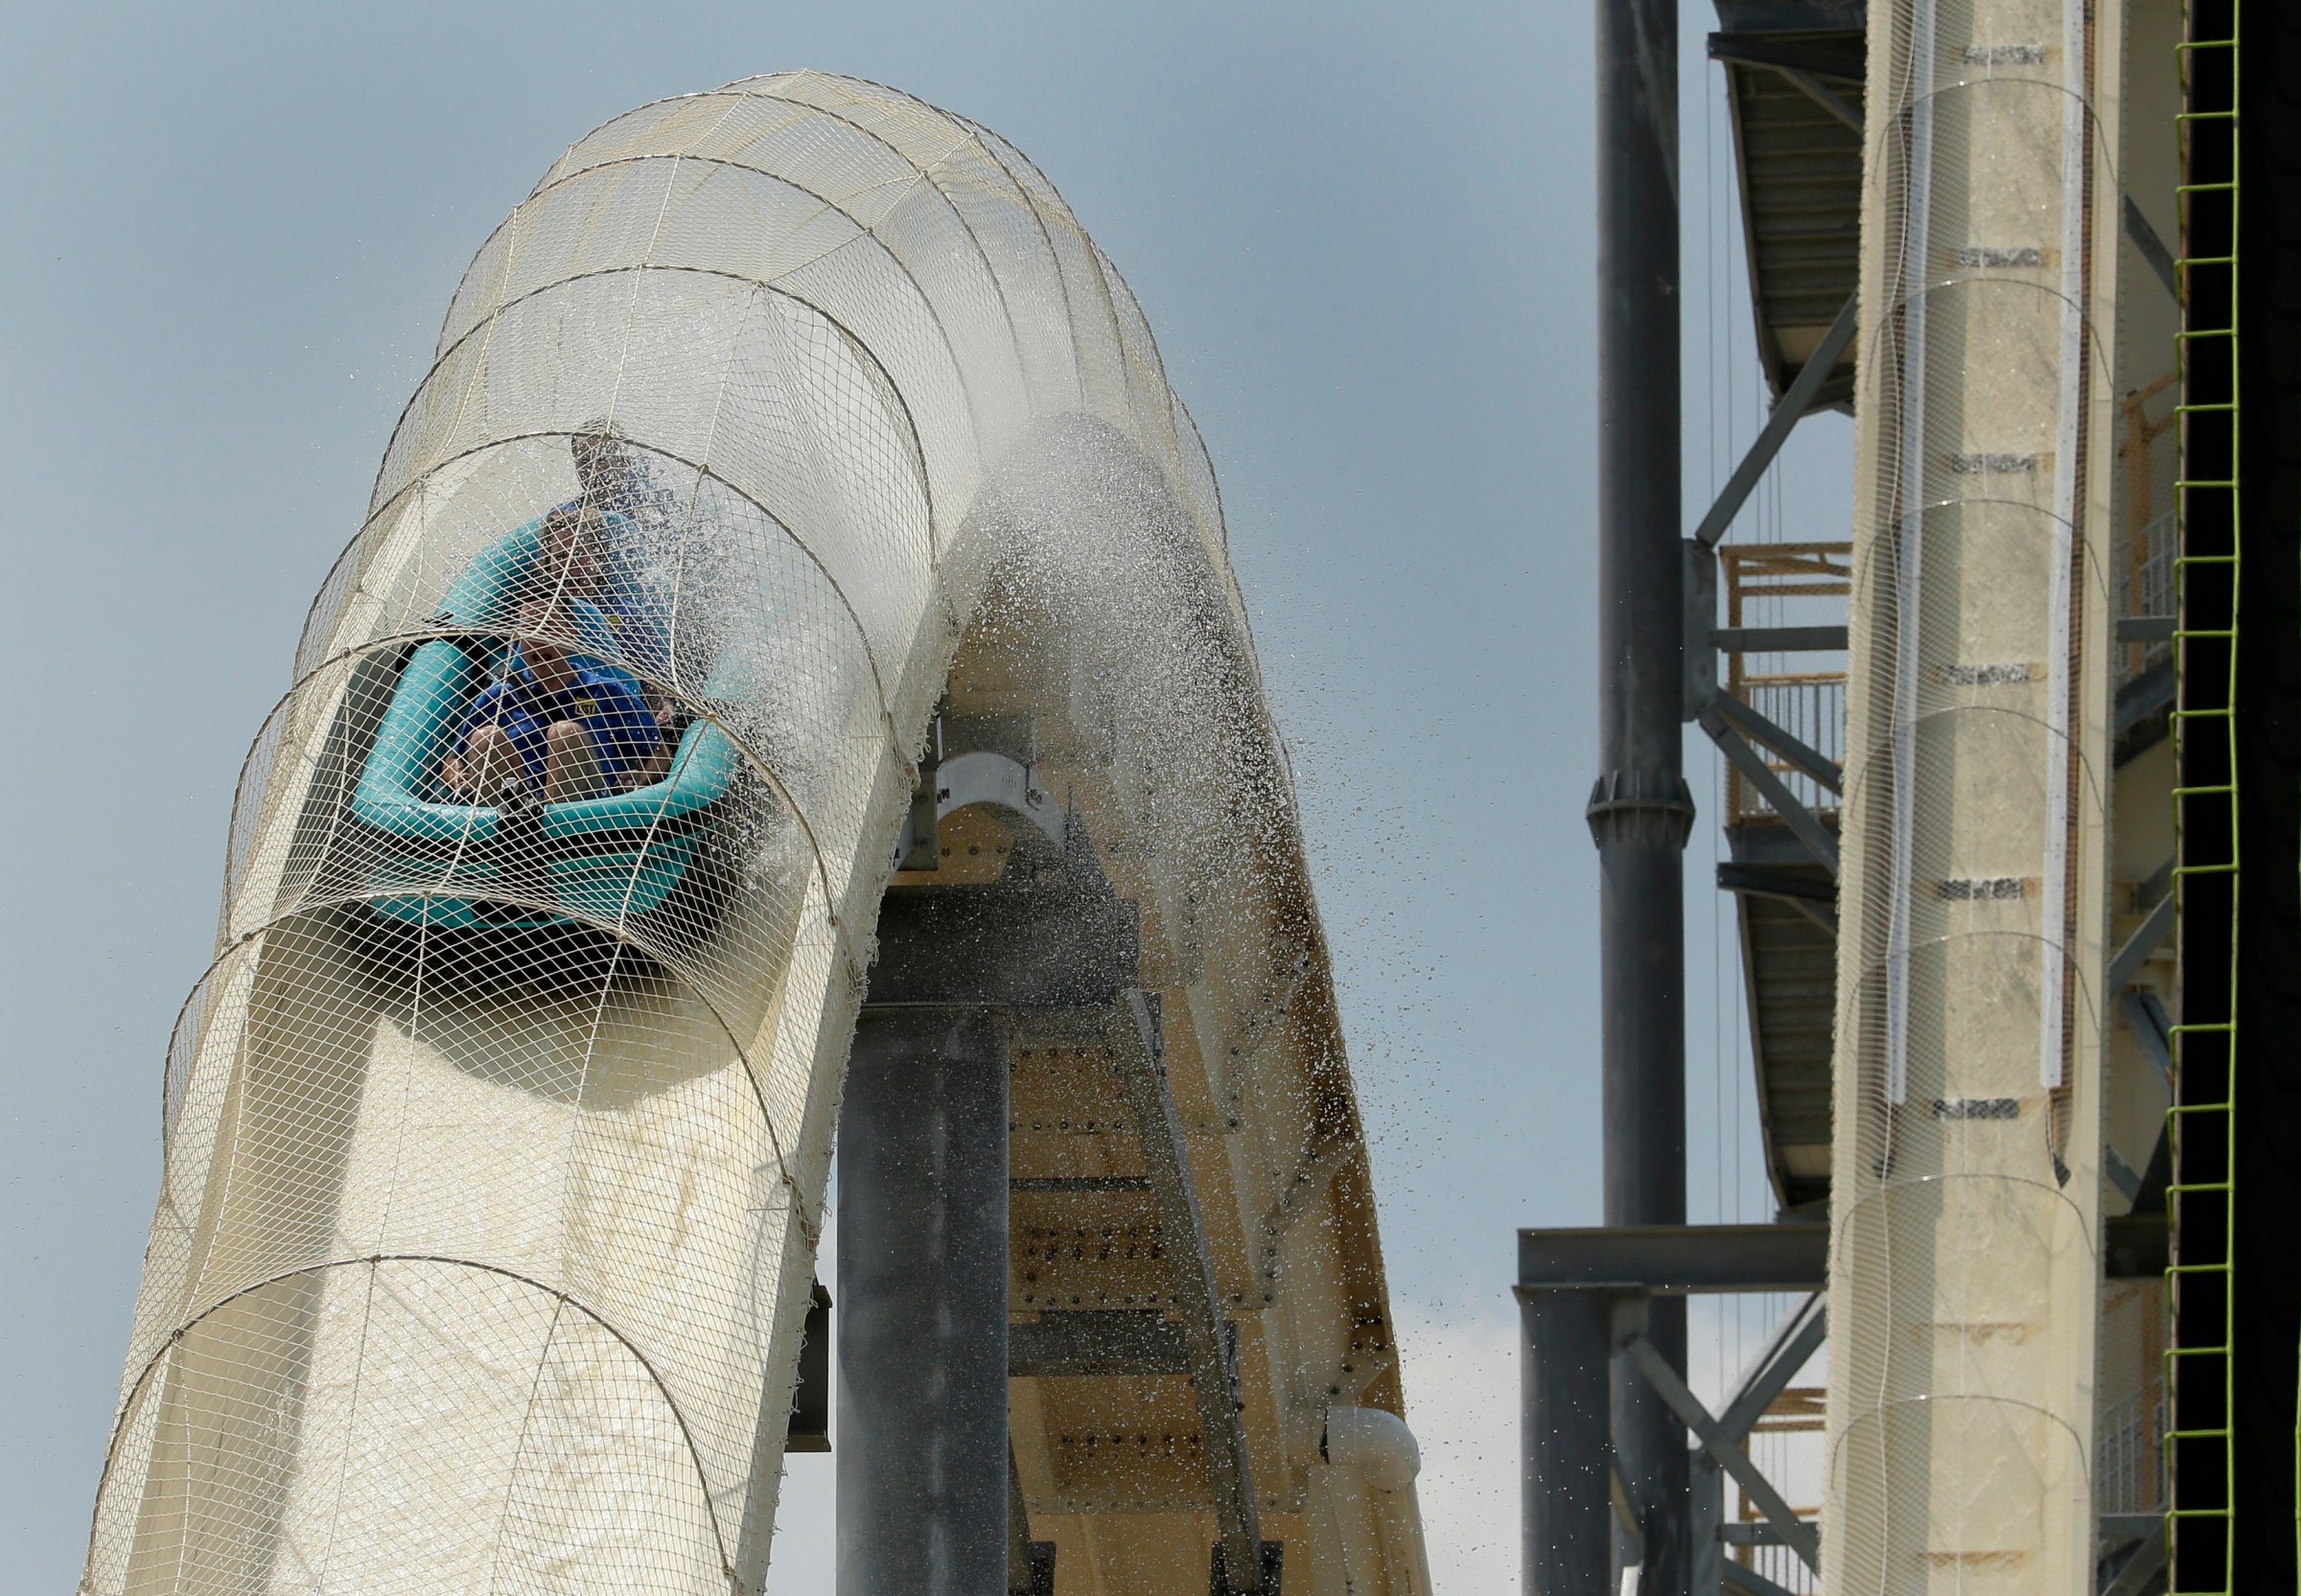 Riders are propelled by jets of water as the go over a hump while riding the world's tallest water slide called "Verruckt" at Schlitterbahn Waterpark, on July 9, 2014, in Kansas City, Kan.